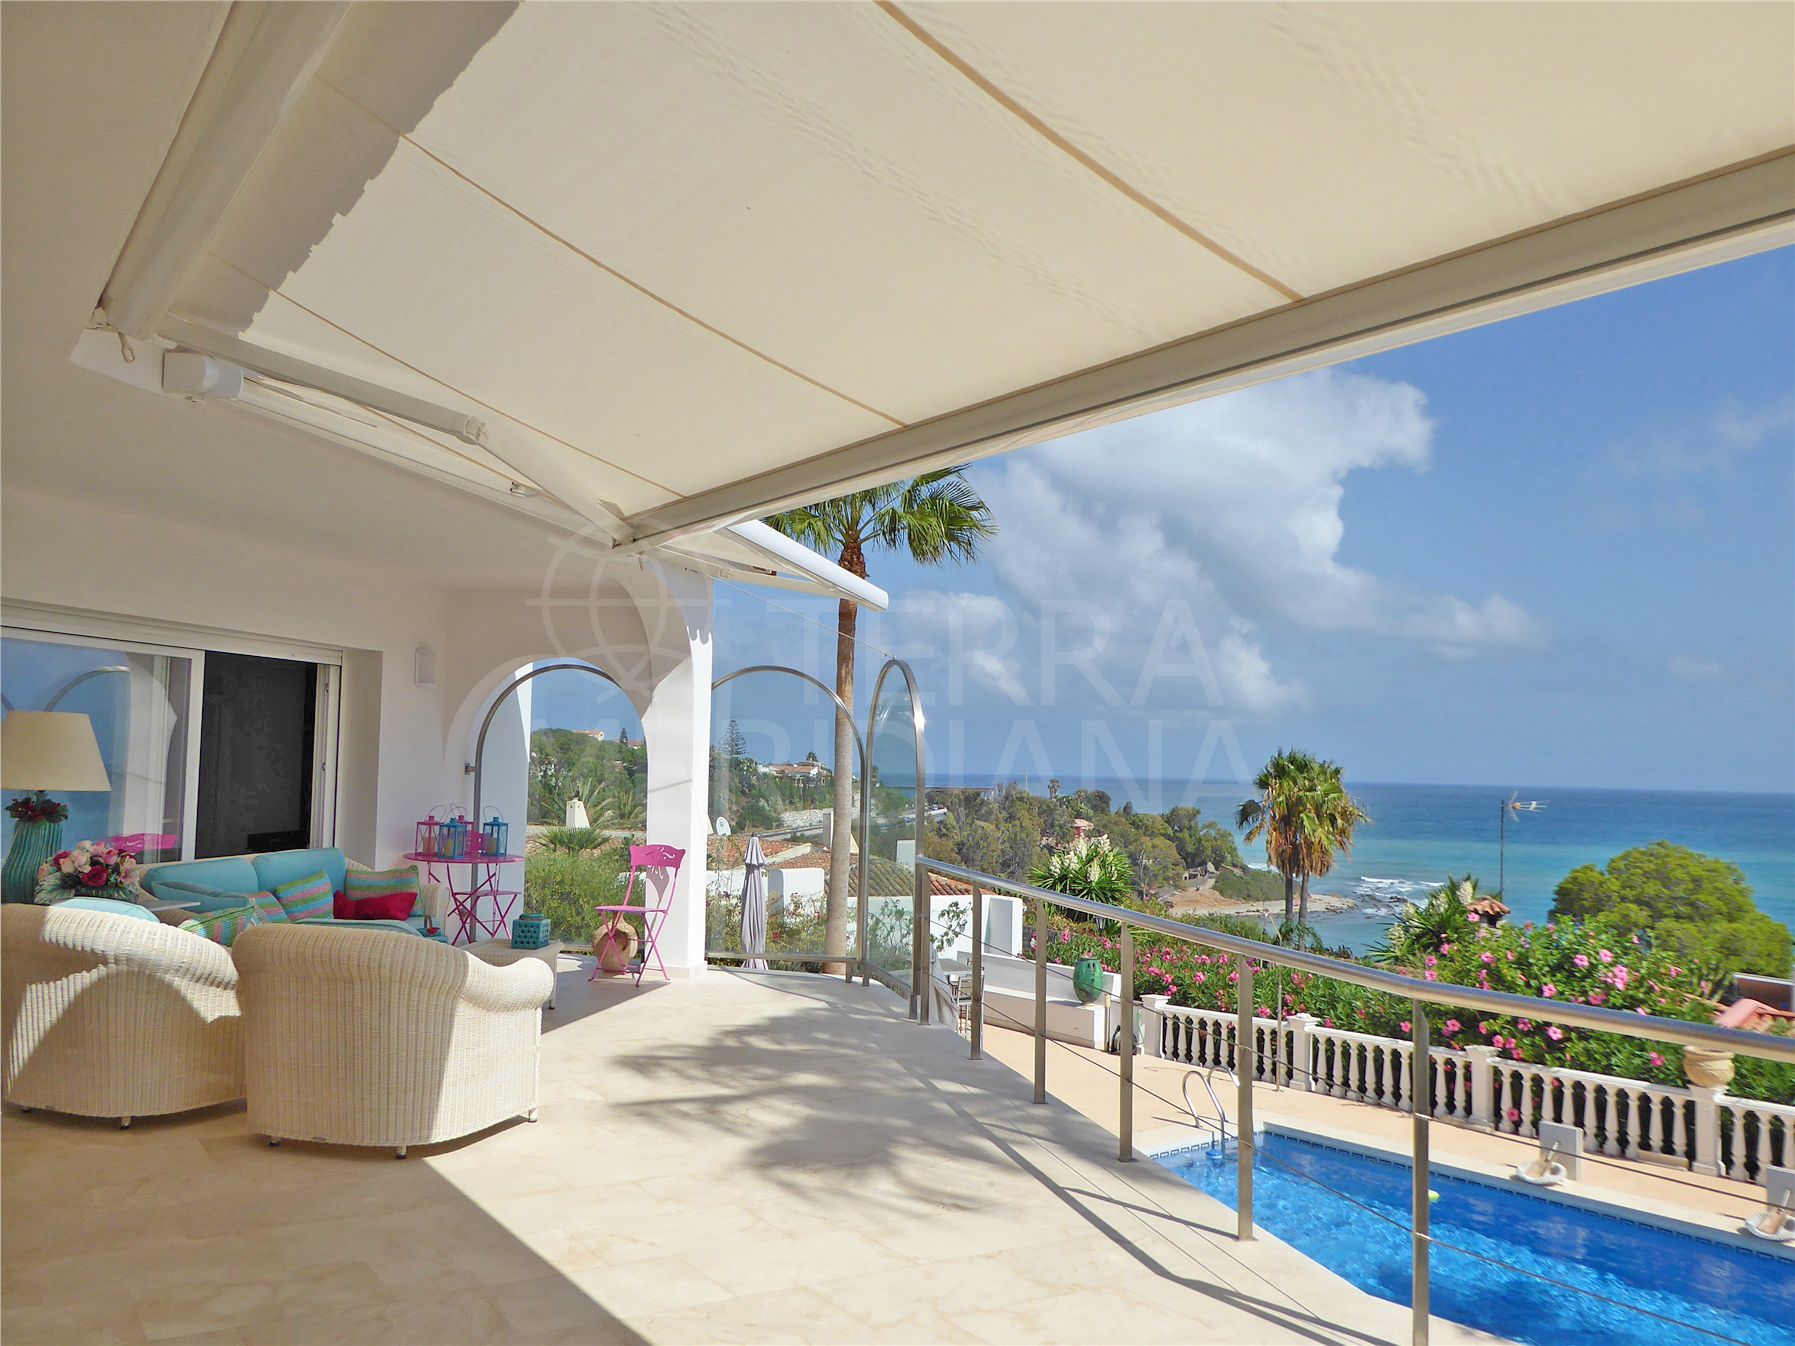 Renovated beachside villa with open sea views for sale in the community of San Diego, Sotogrande